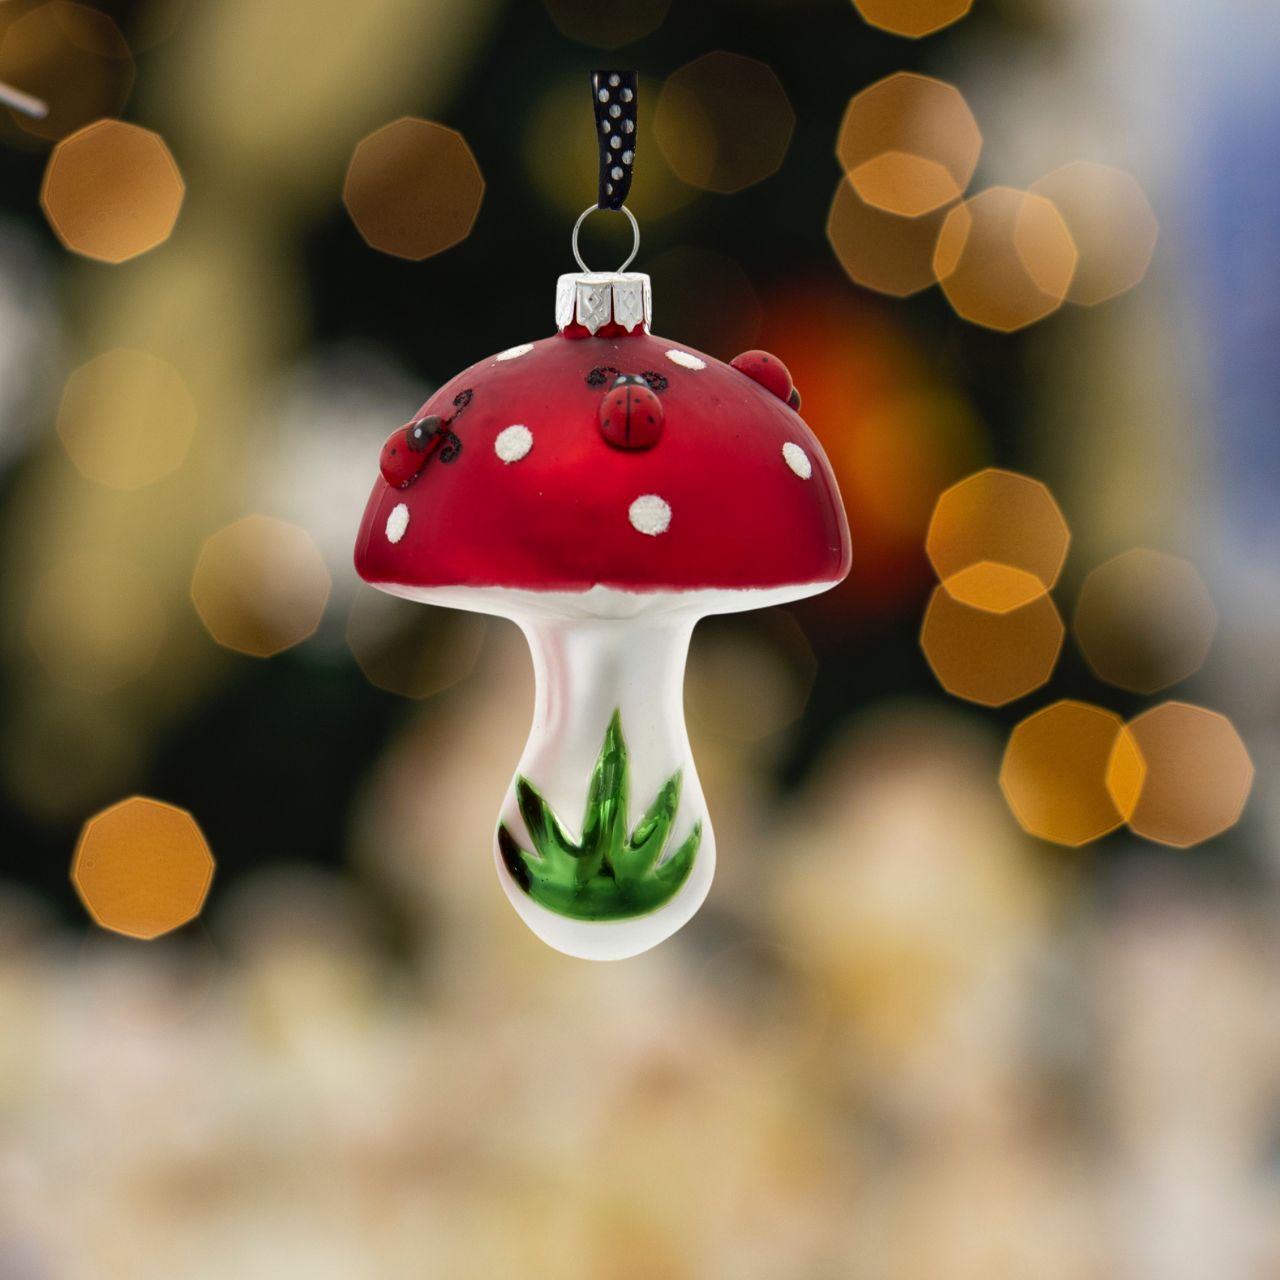 Ladybug On Mushroom Christmas Ornaments - Single Mushroom Head  Kurt Adler's red and white mushroom ornaments are a fun and festive addition to any holiday décor or Christmas tree. Single Mushroom is decorated with green grass and red and black ladybugs.